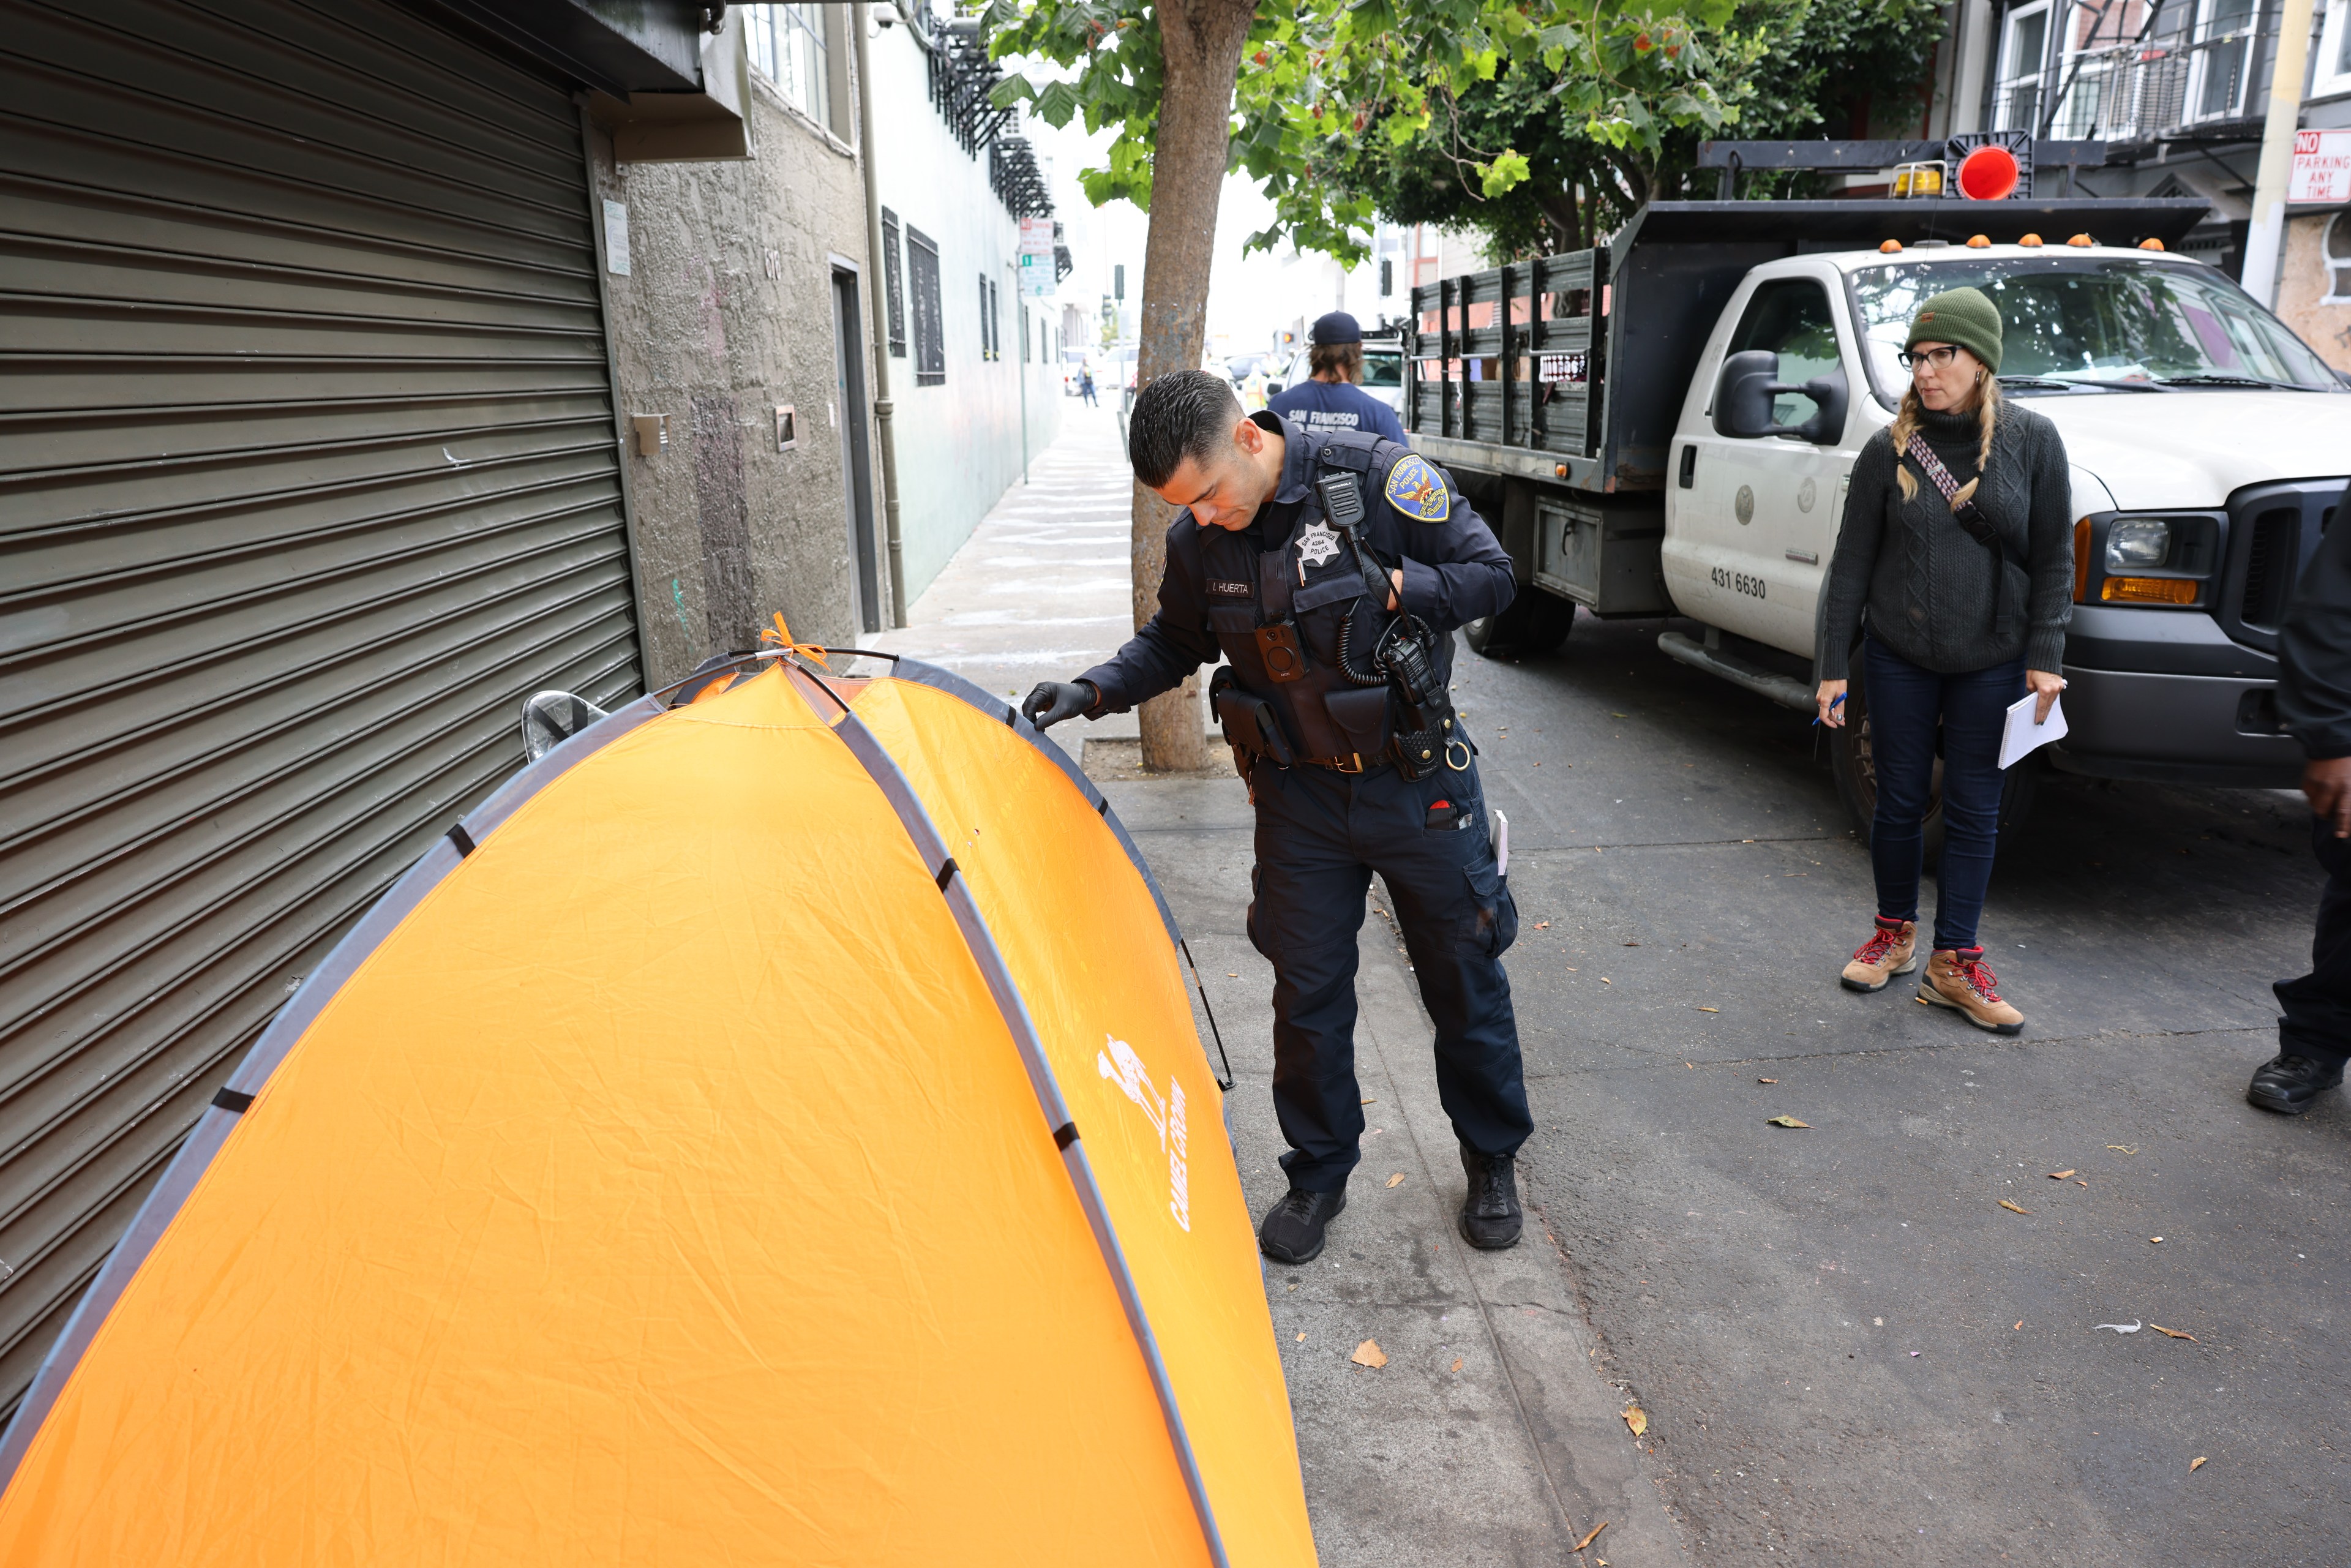 A police officer inspects an orange tent on a sidewalk; a woman and a vehicle are nearby.